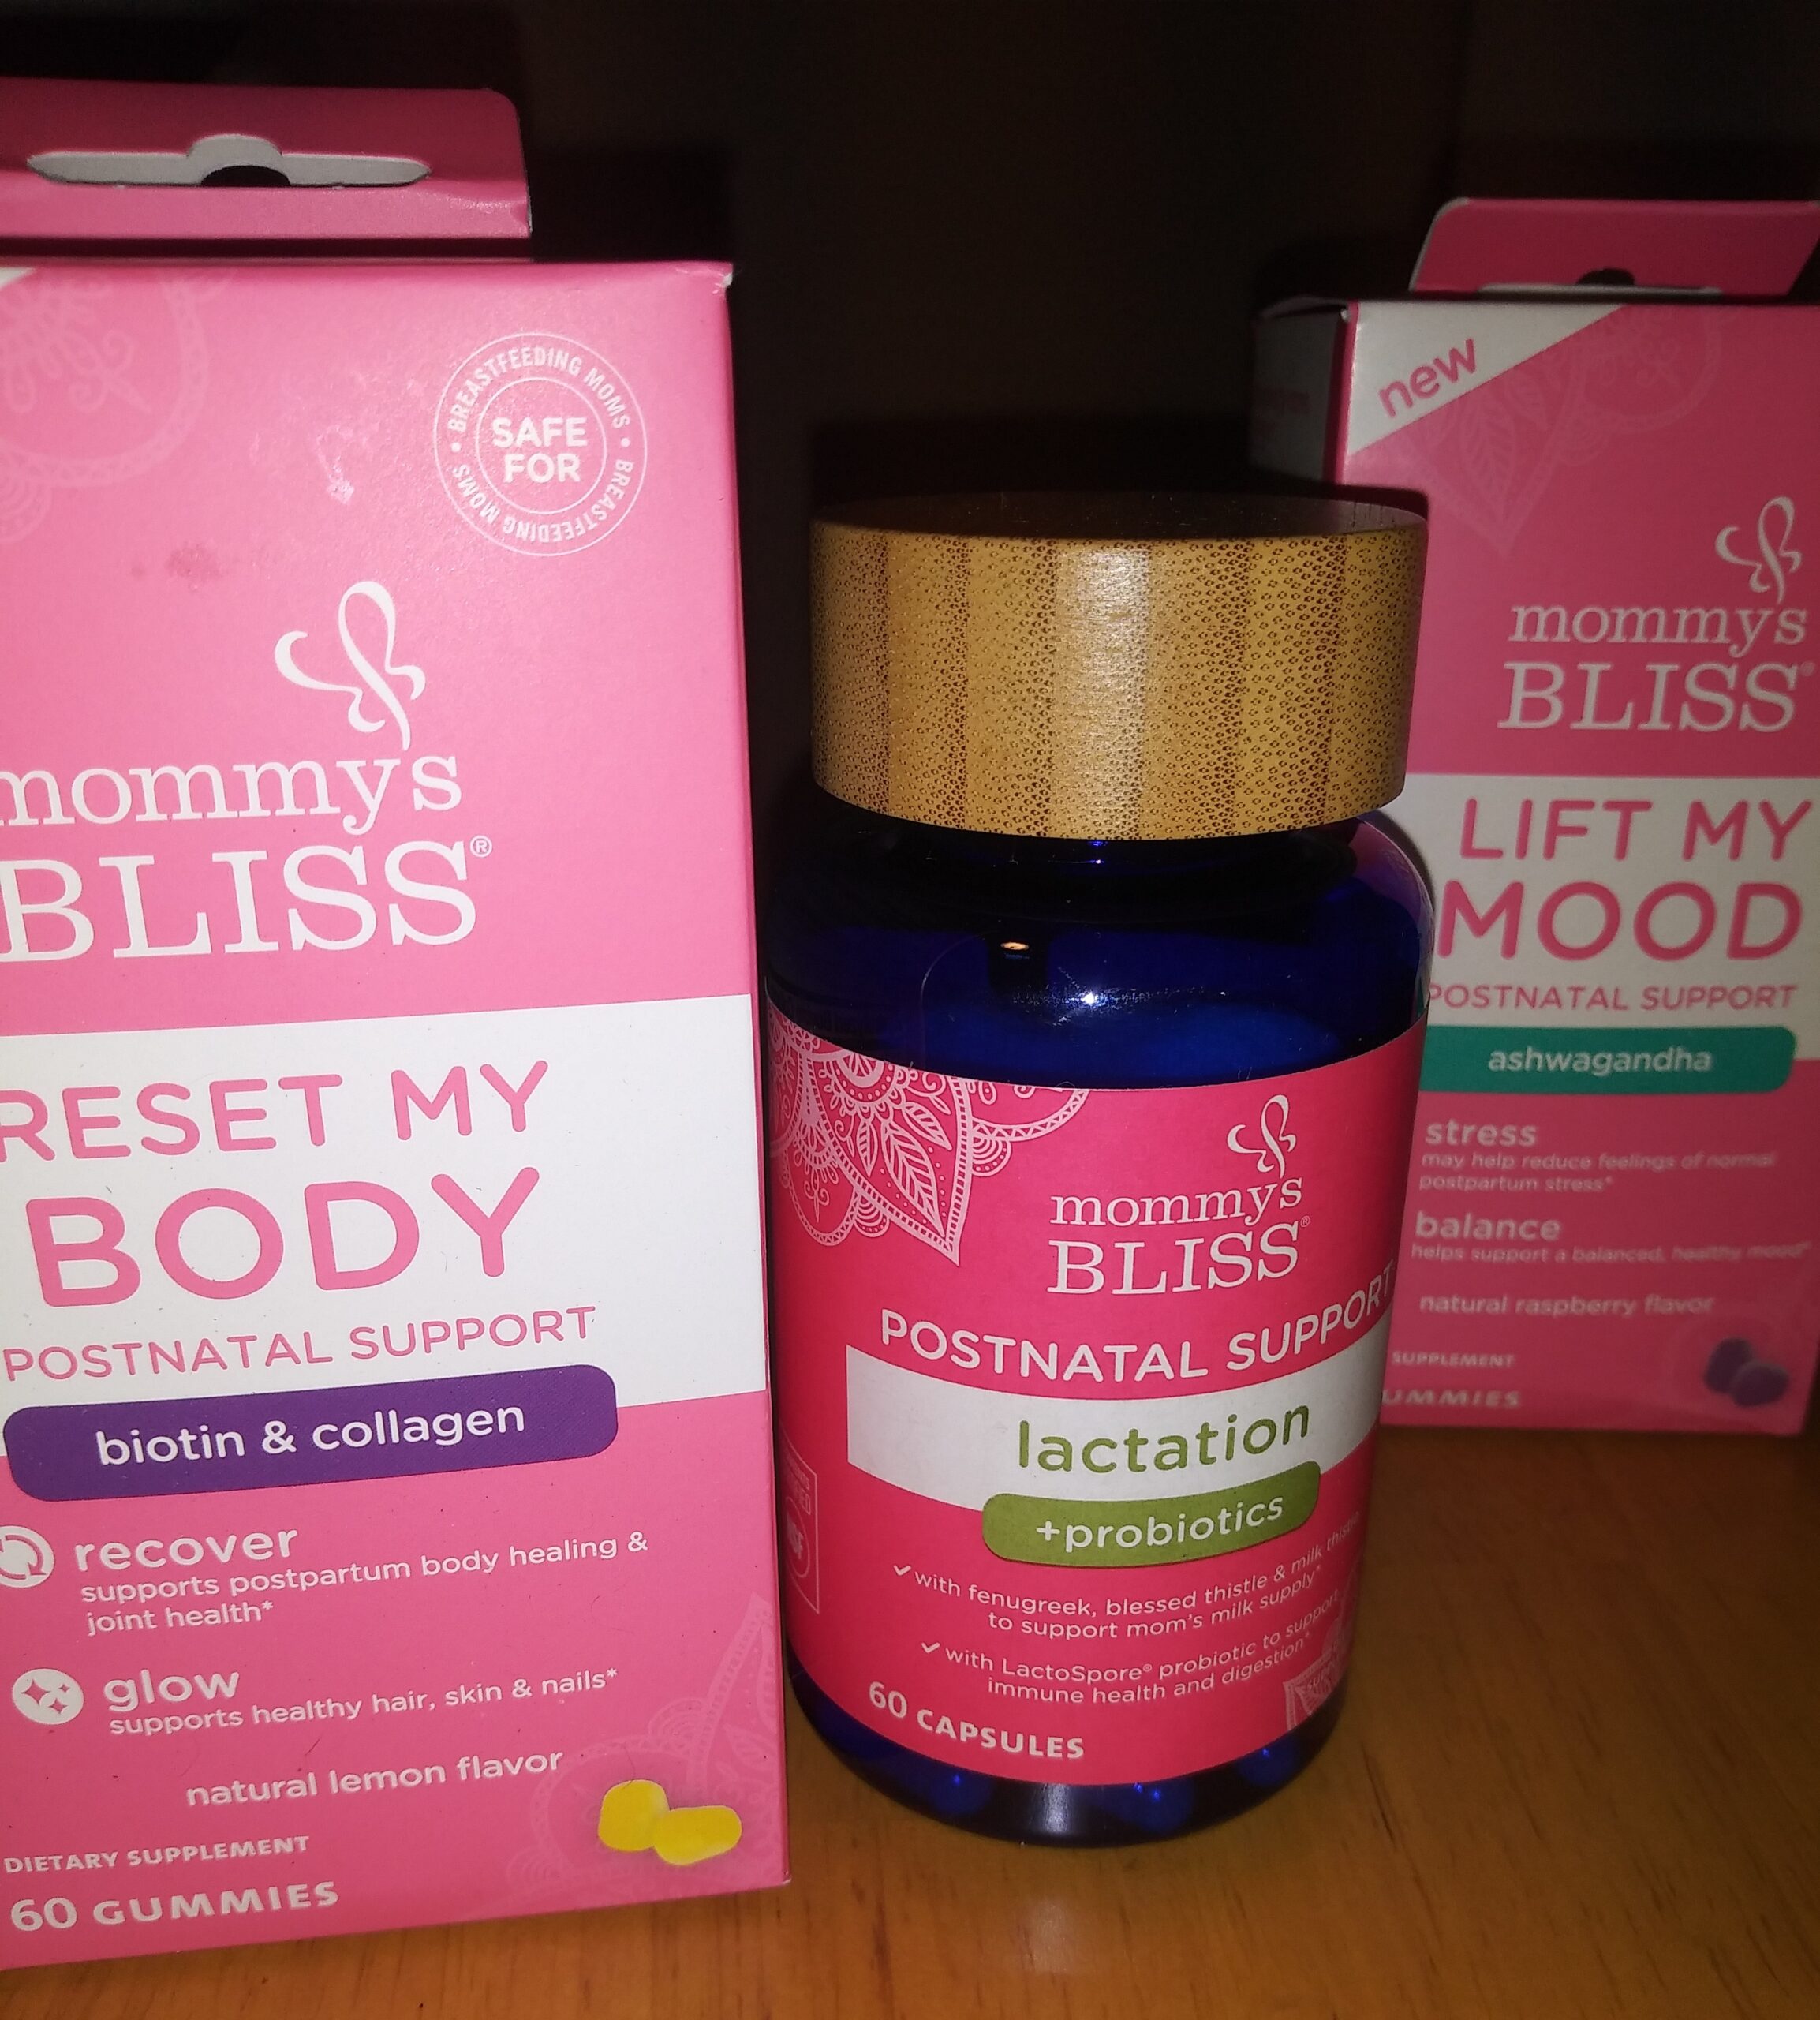 Reset and Recharge with Mommy Bliss Supplements